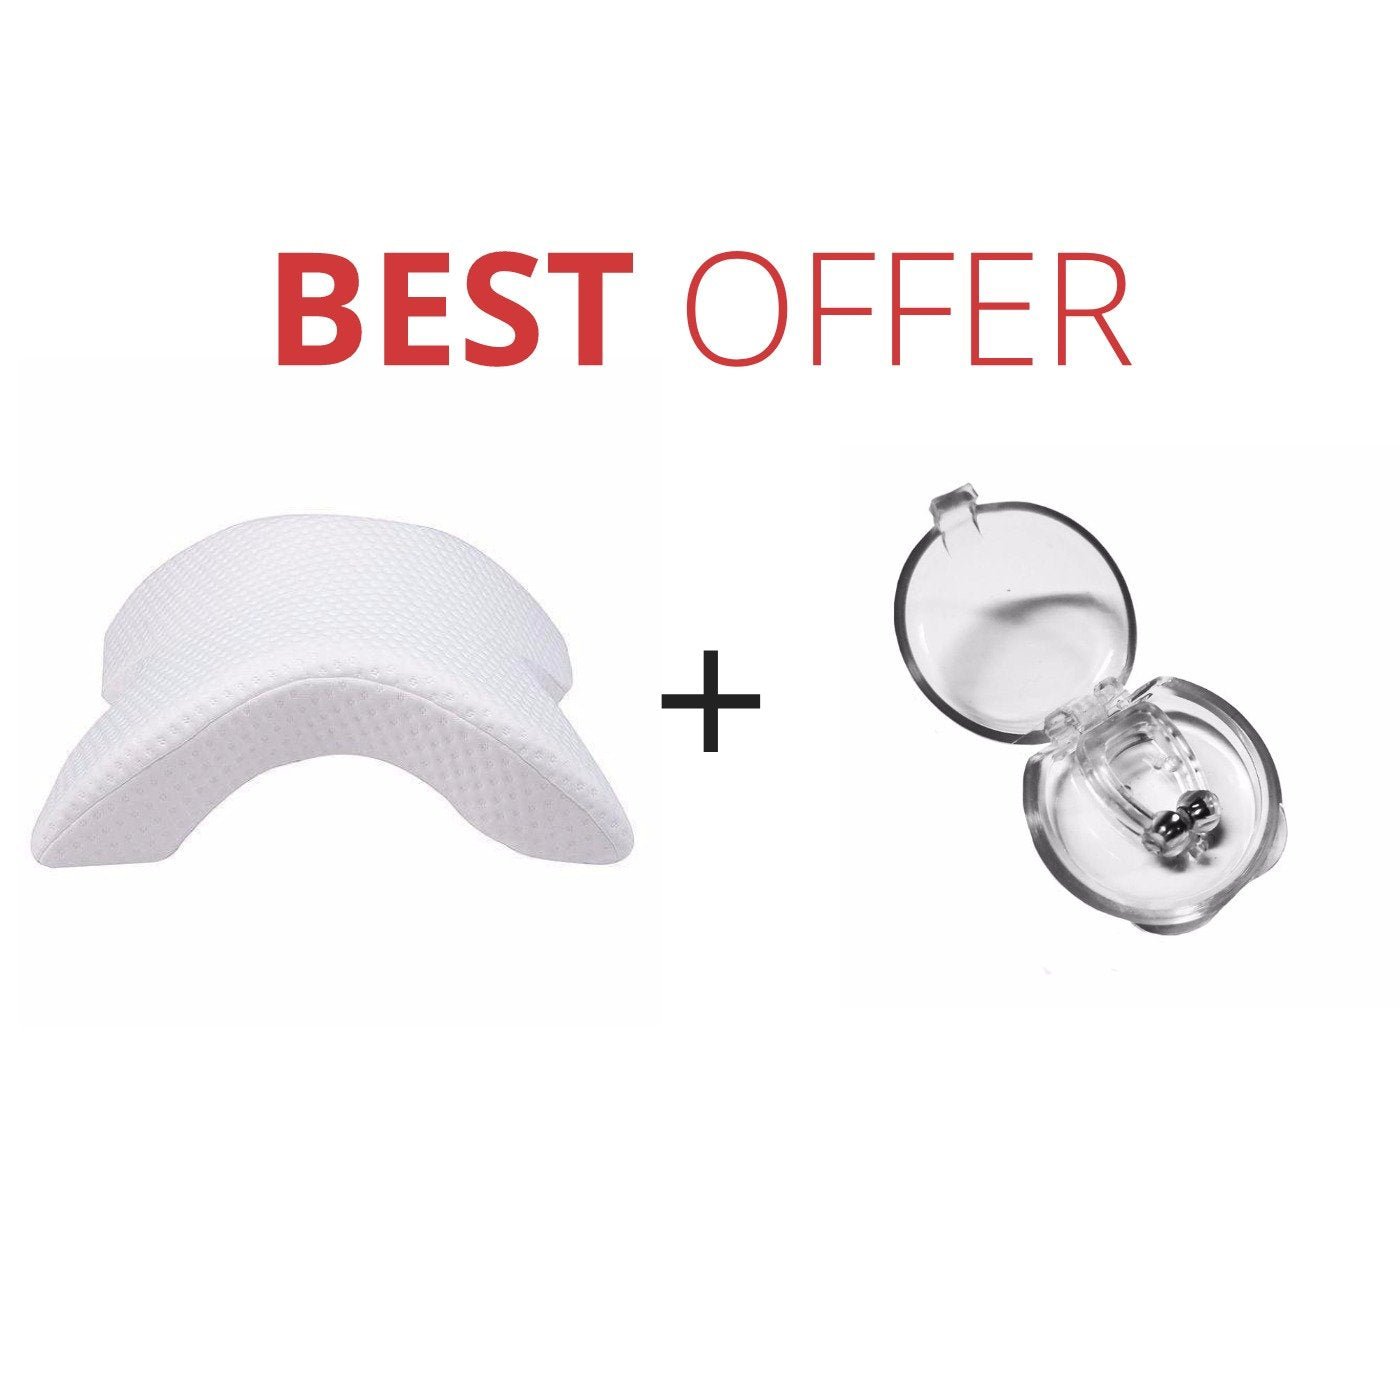 Silicone Magnetic Anti Snore Stop Snoring Nose Clip Sleep Tray Sleeping Aid Apnea Guard Night Device - Sleeping Aids -  Trend Goods